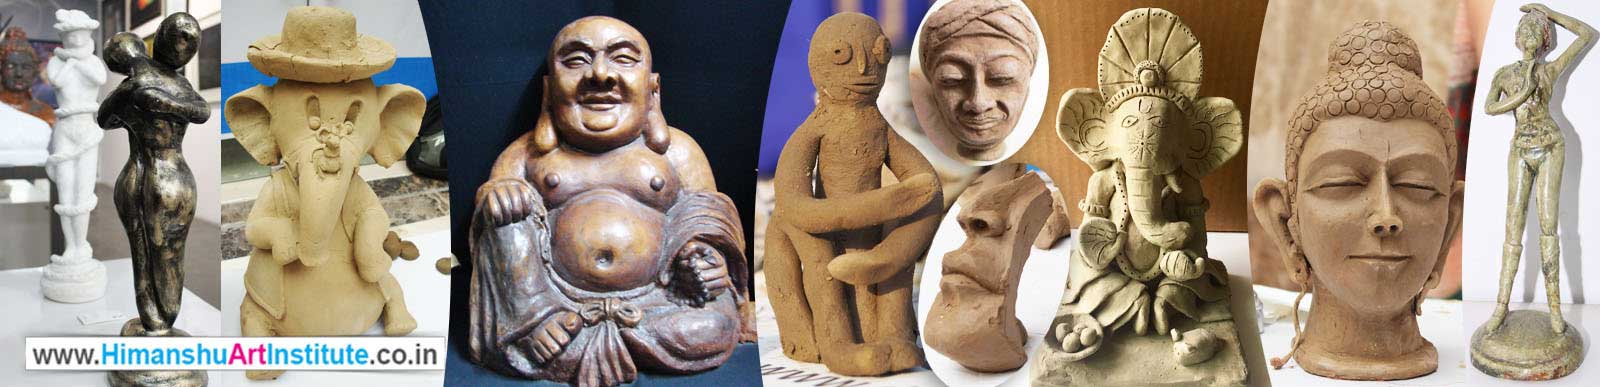 Online Clay Modeling Classes, Best Institute of Clay Modeling in Delhi, India, Certificate Course in Clay Modeling